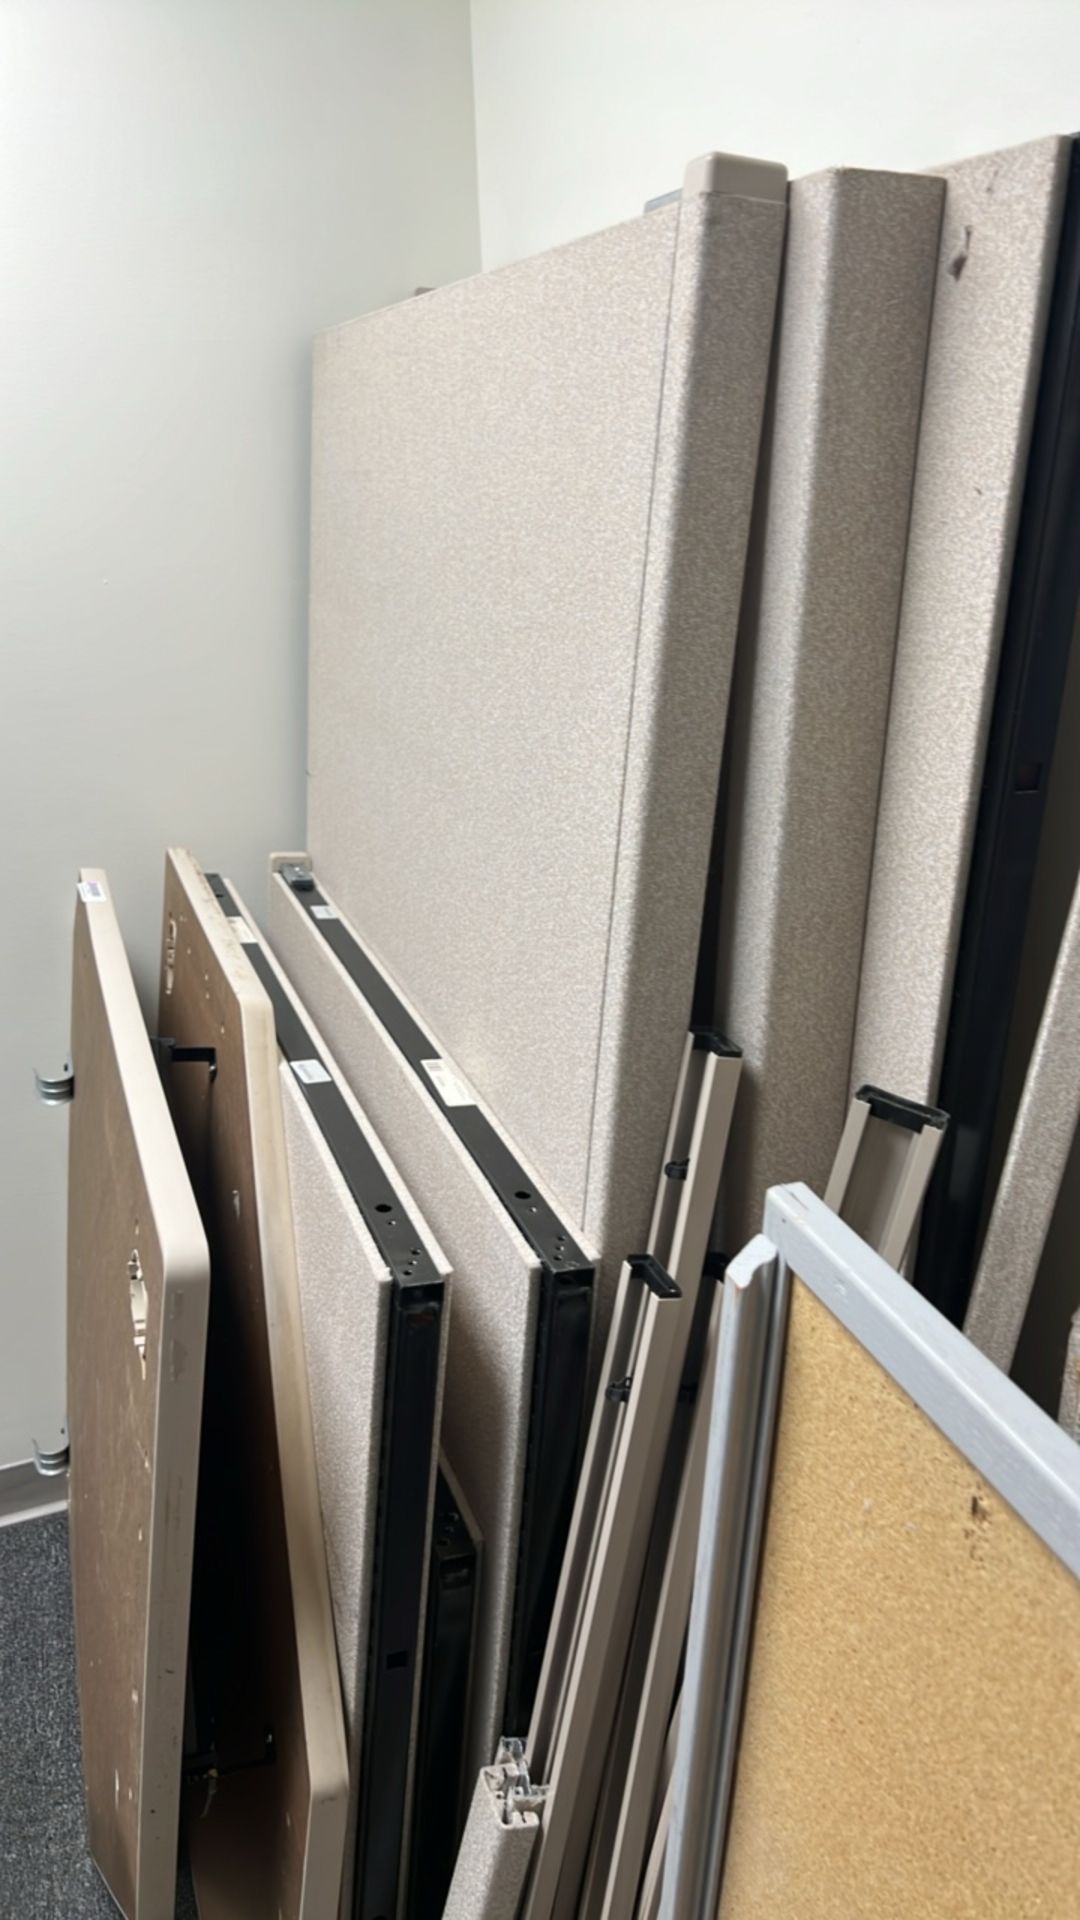 OFFICE CUBICLE SYSTEM - Image 2 of 5